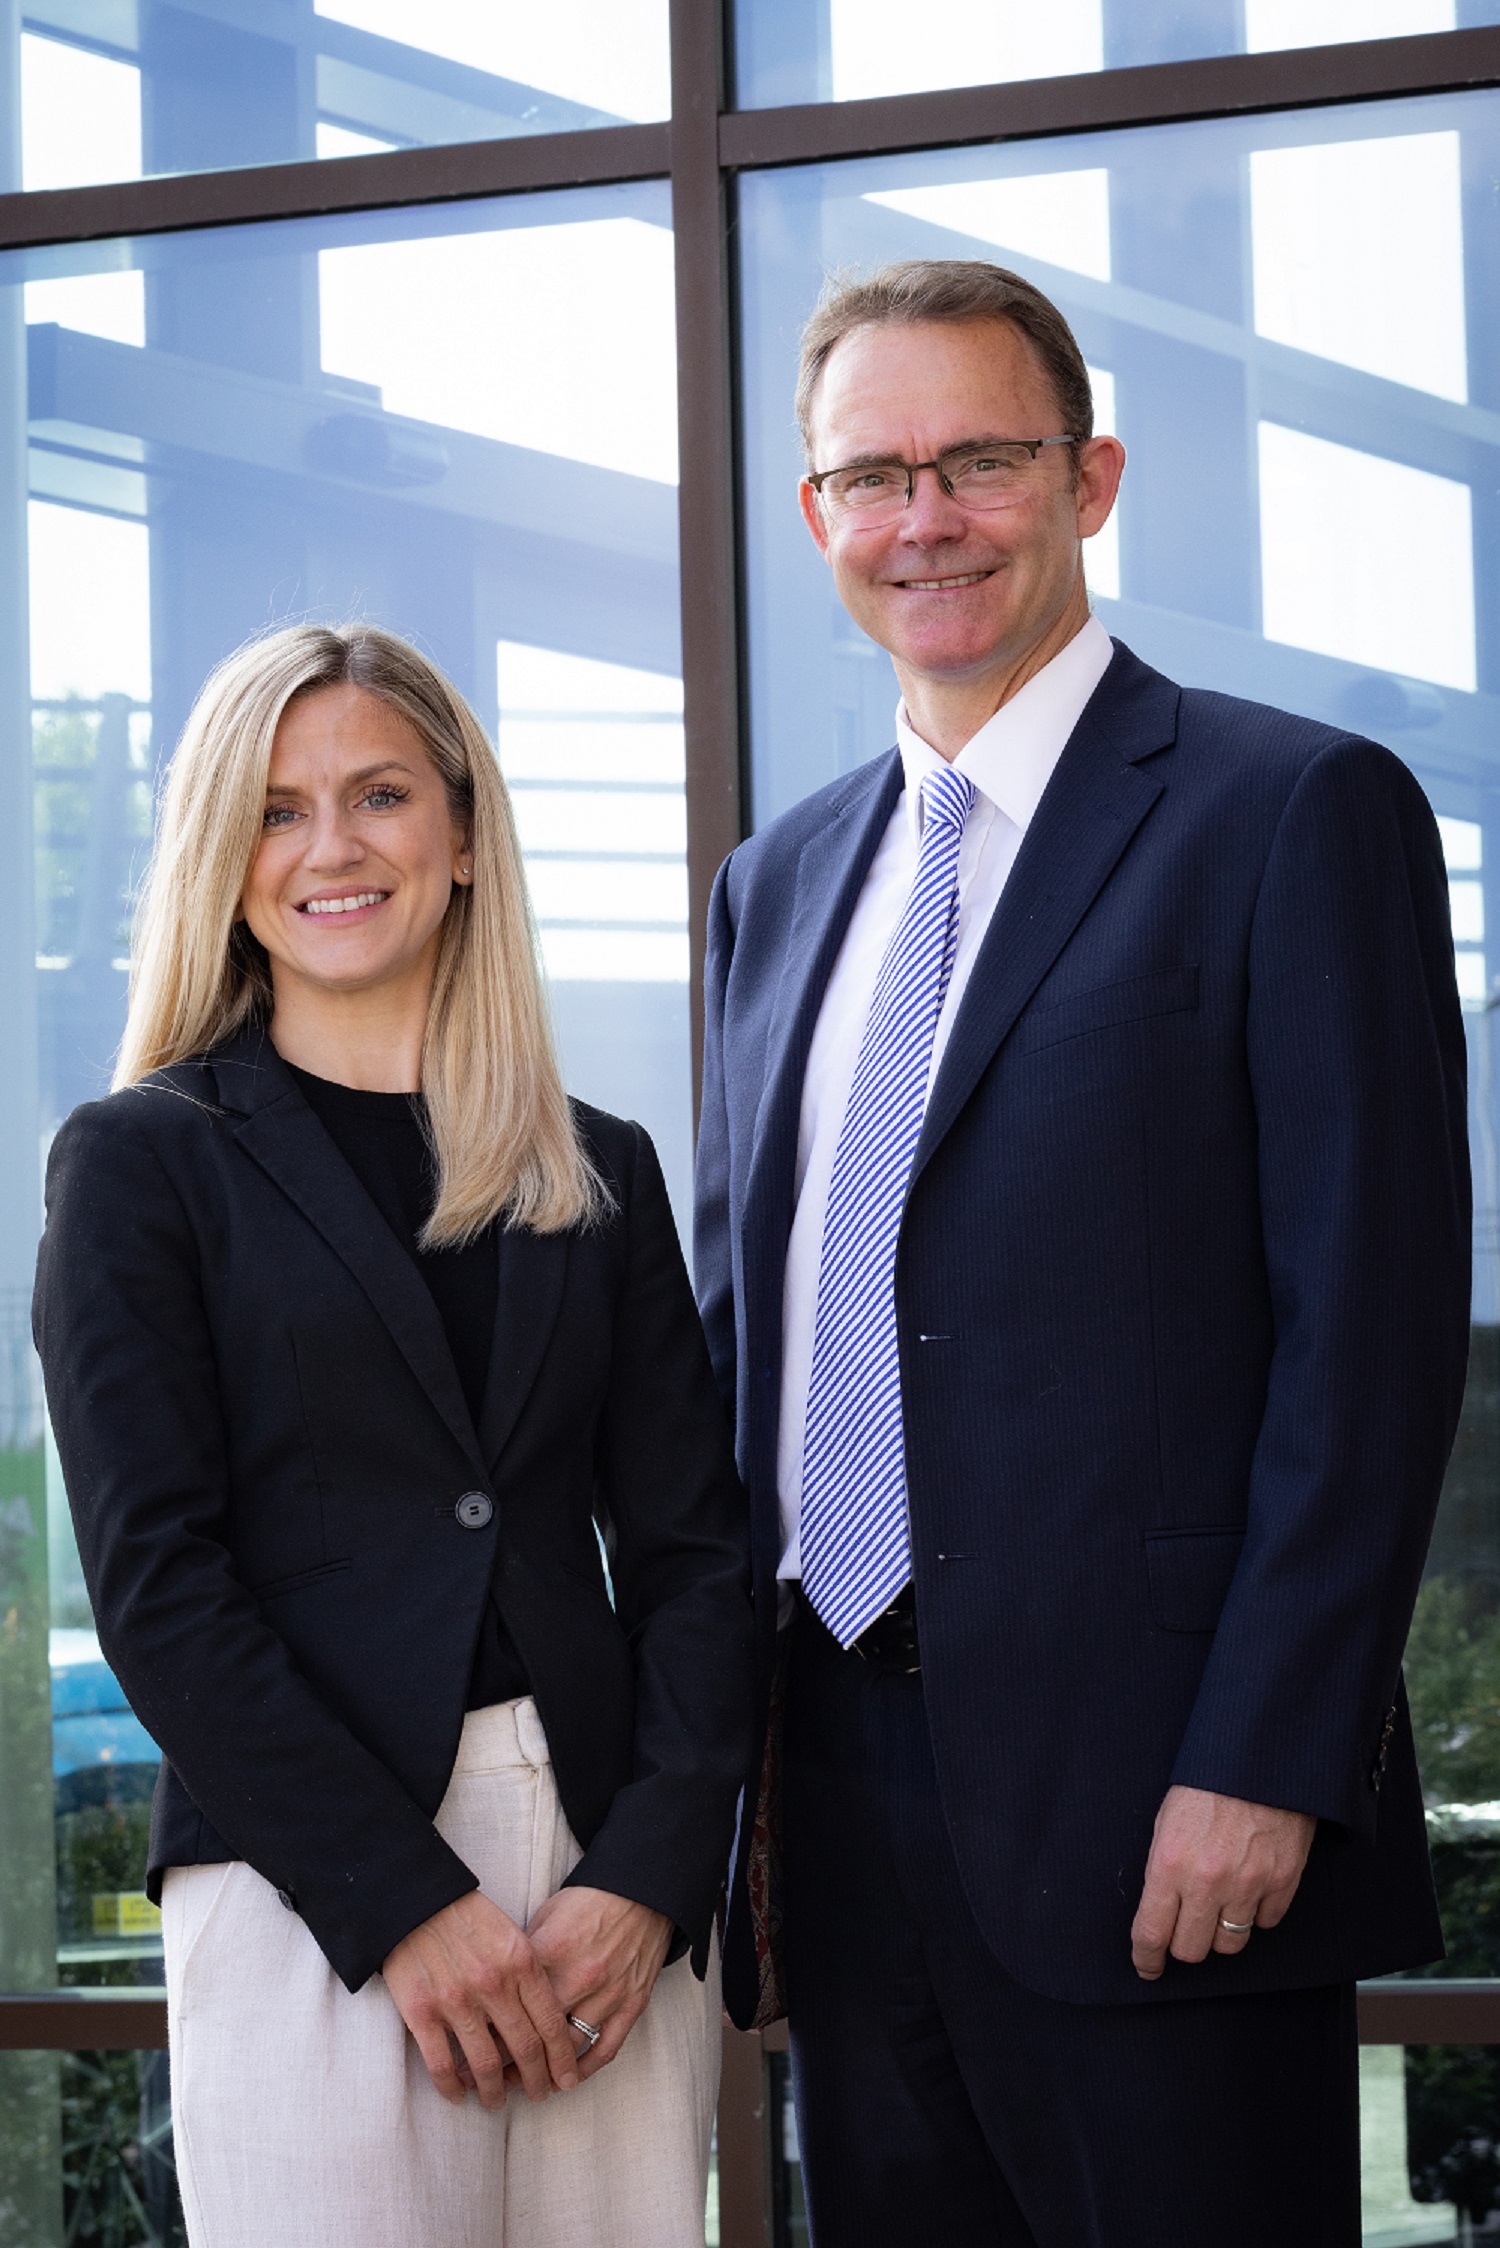 Bonnie and Graham join Trethowans Solicitors in Dorset as Senior Associates